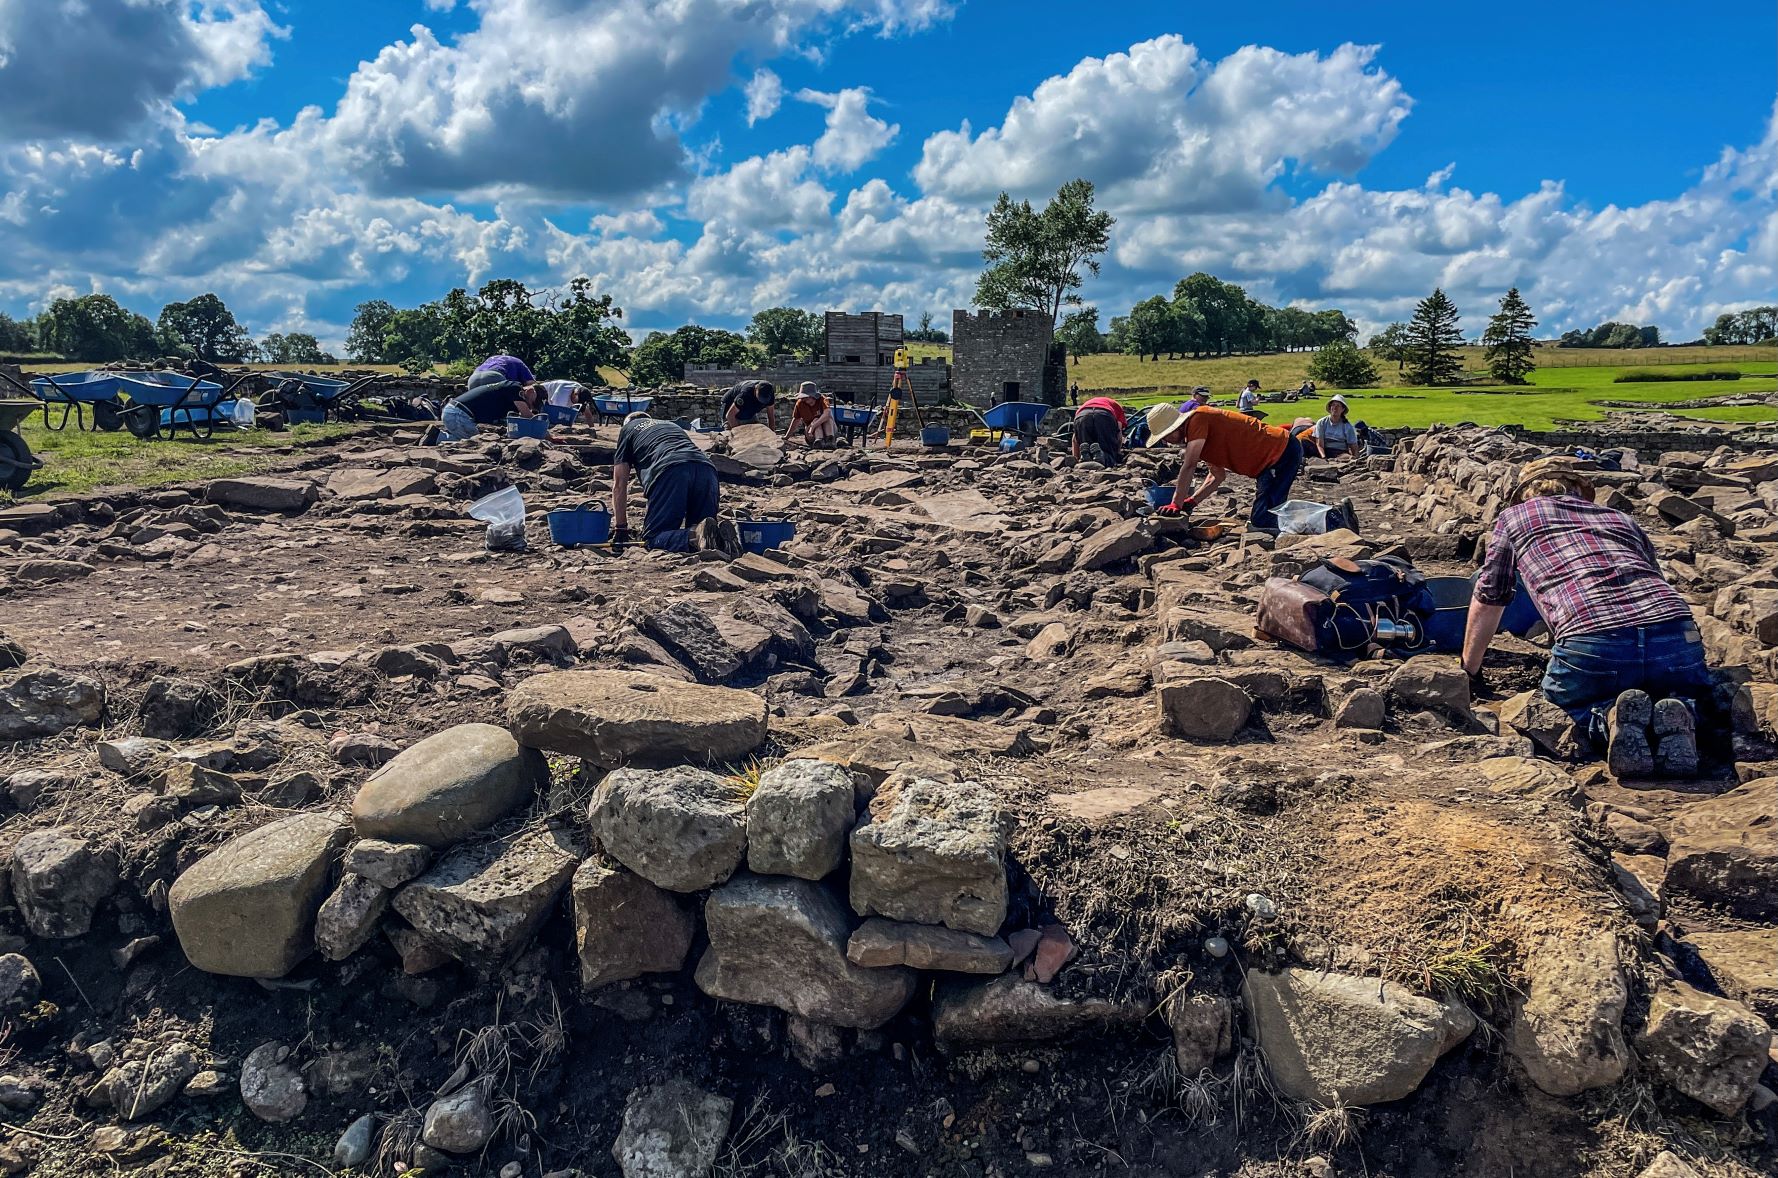 People on their knees digging at an archaeological site.